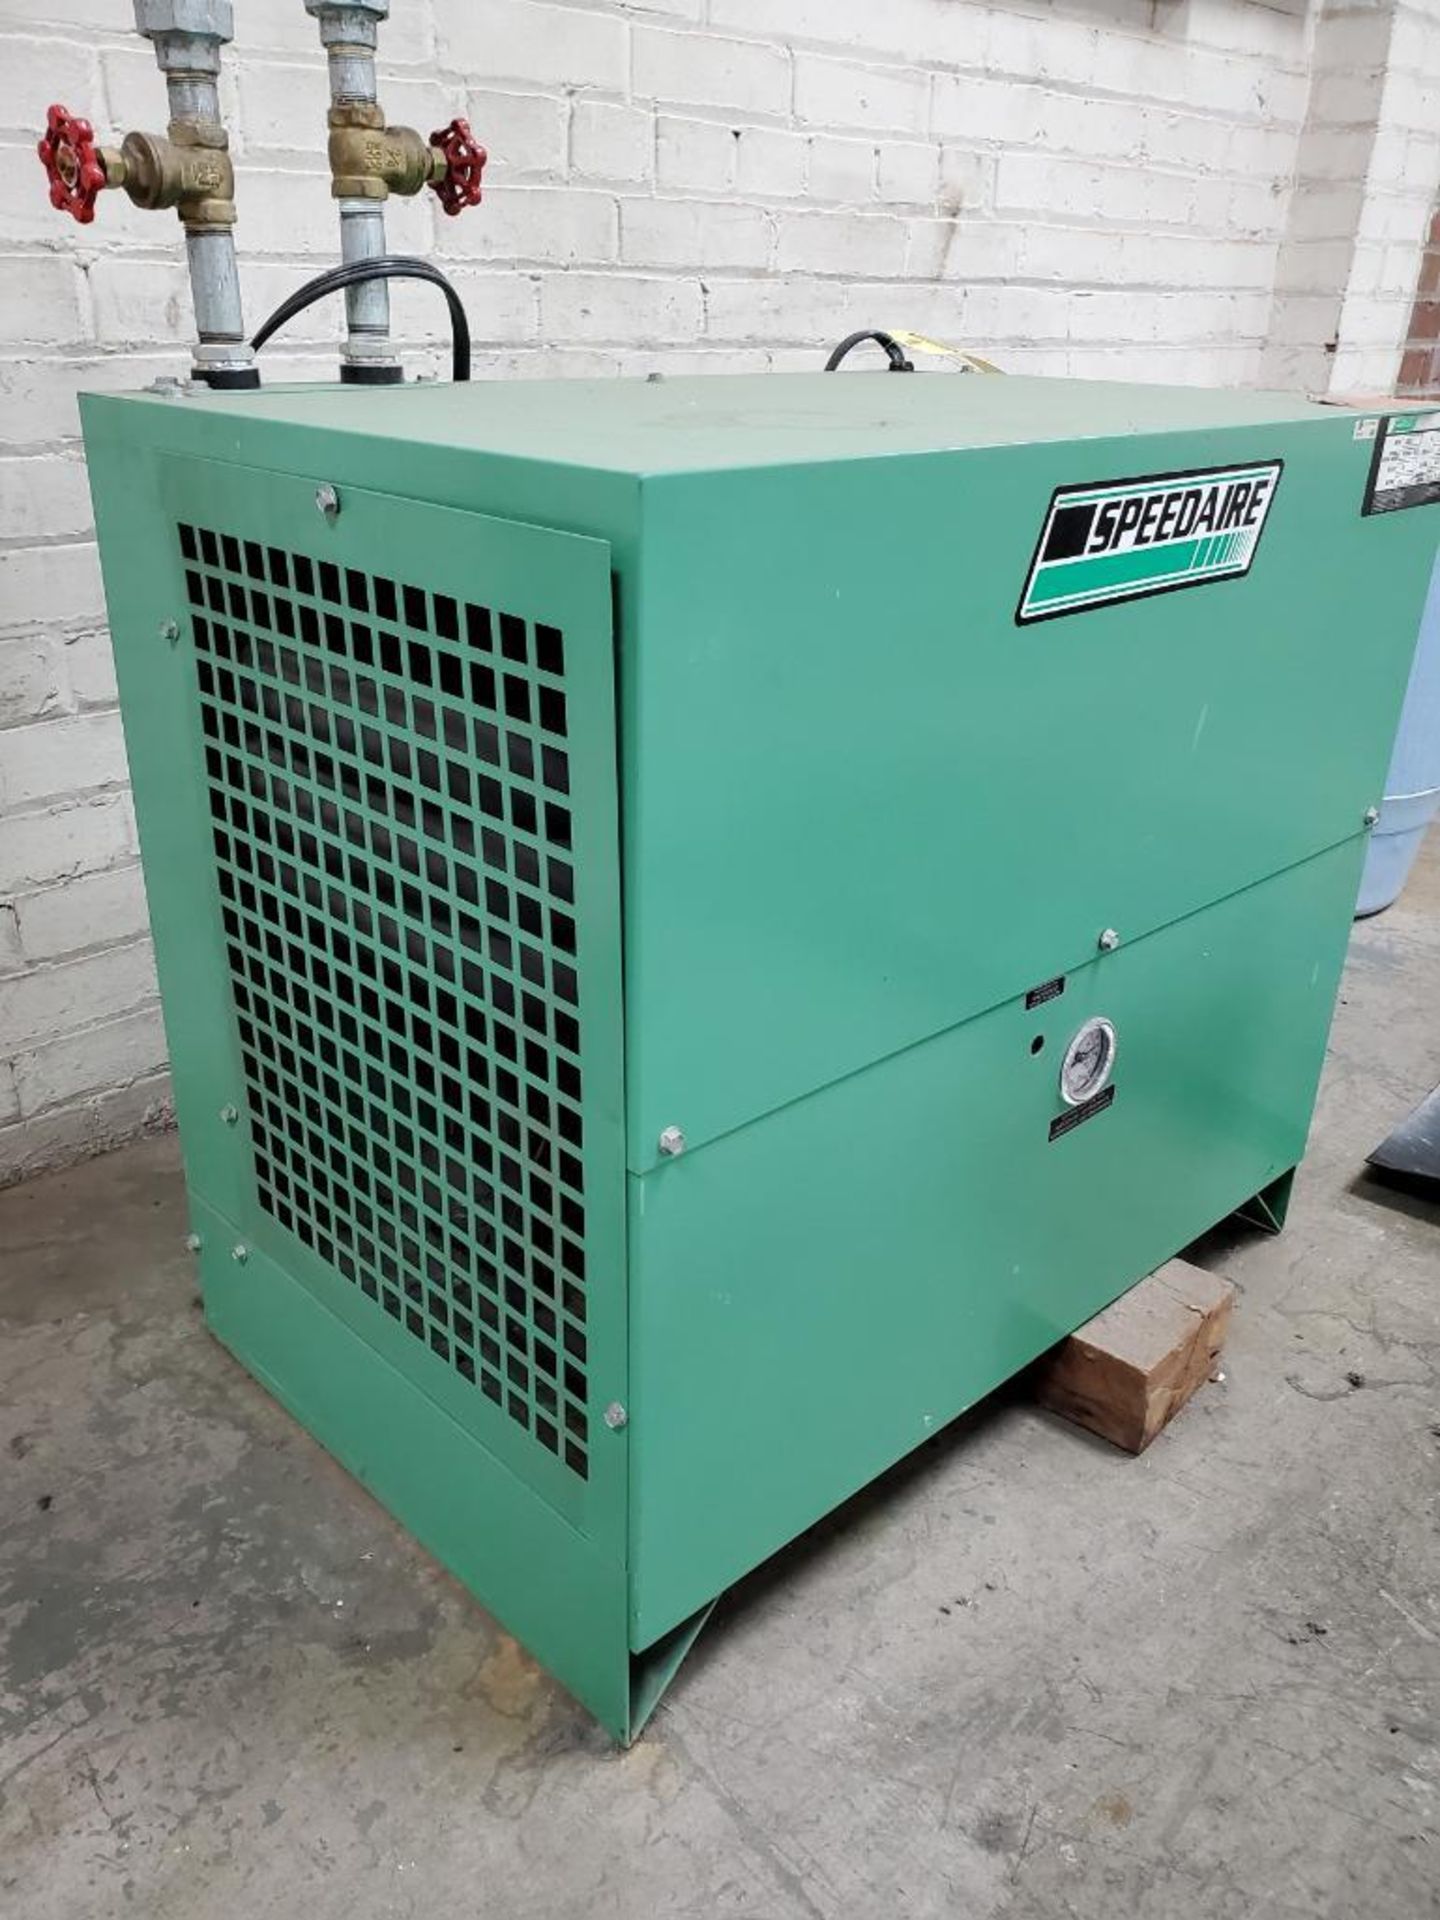 Speed Aire Refrigerated Air Dryer, Model 52557C, 1/2 Hp, 36.8 Cfm, R-22 - Image 4 of 5